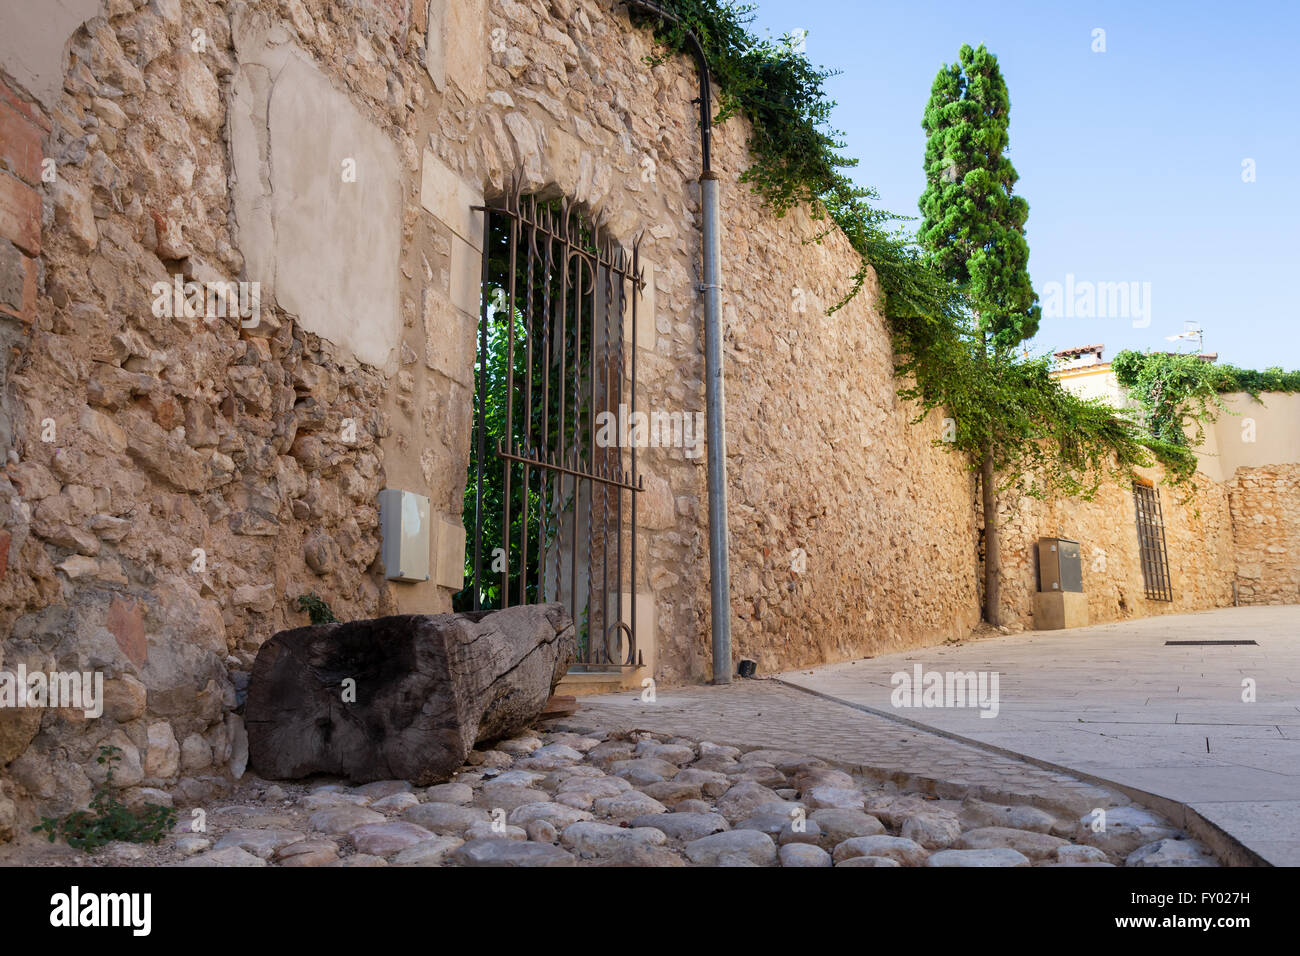 Old stone wall with closed door, street view of old Calafell town, Spain Stock Photo